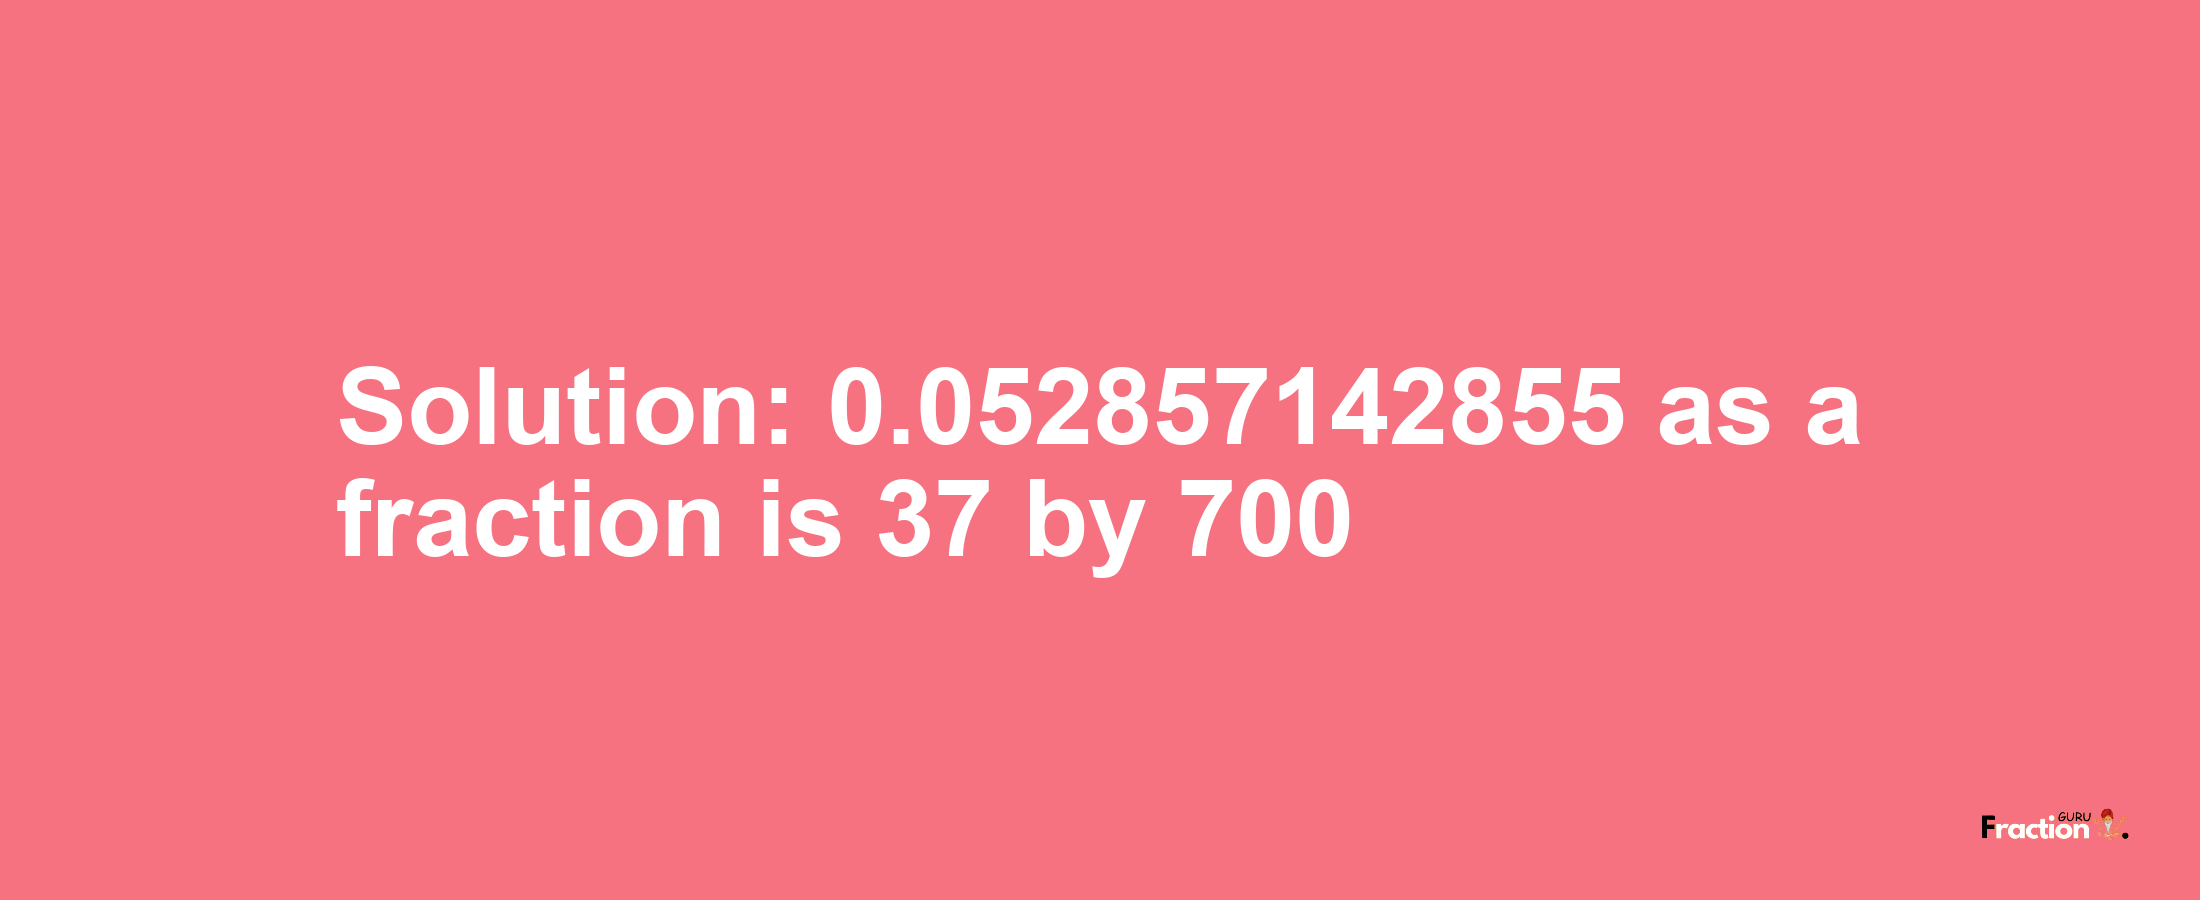 Solution:0.052857142855 as a fraction is 37/700